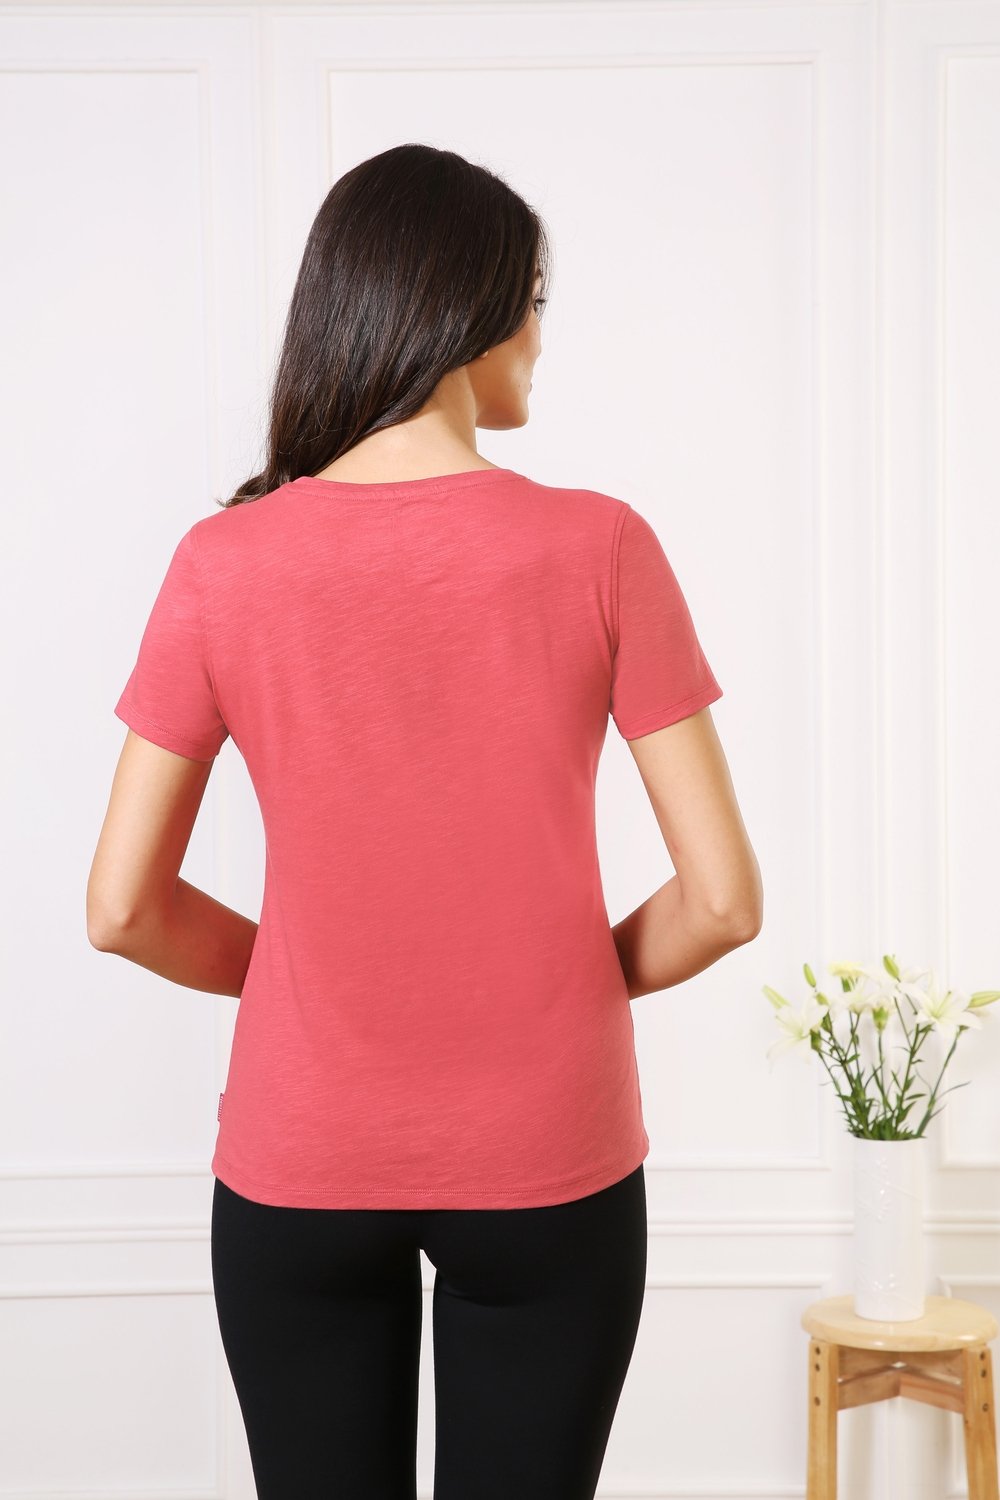 Classic Cotton Every day Wear Pink t-shirt tops for Women - Stilento